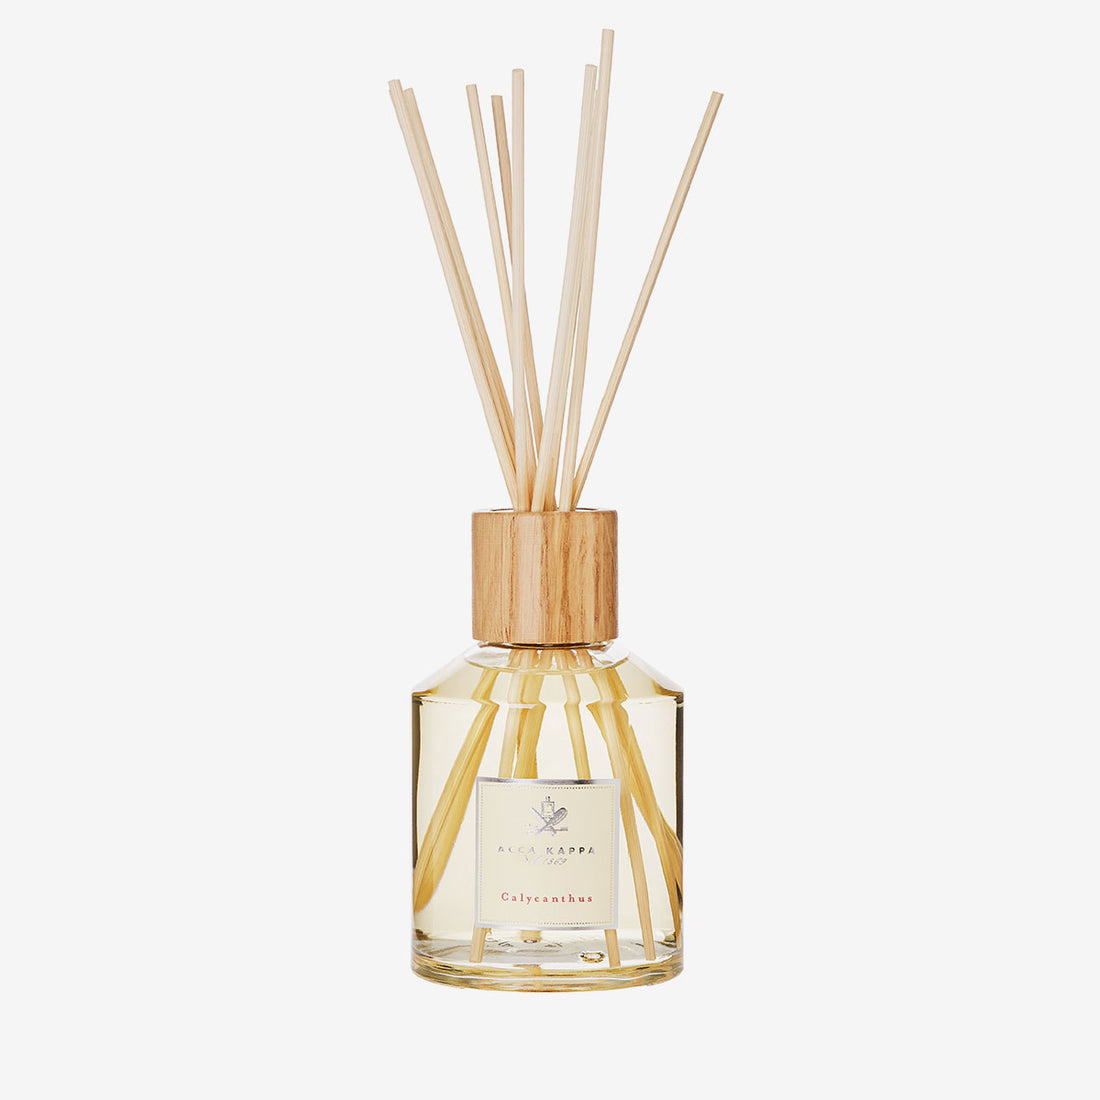 ACCA KAPPA Calycanthus Home Diffuser with Sticks, 250ml